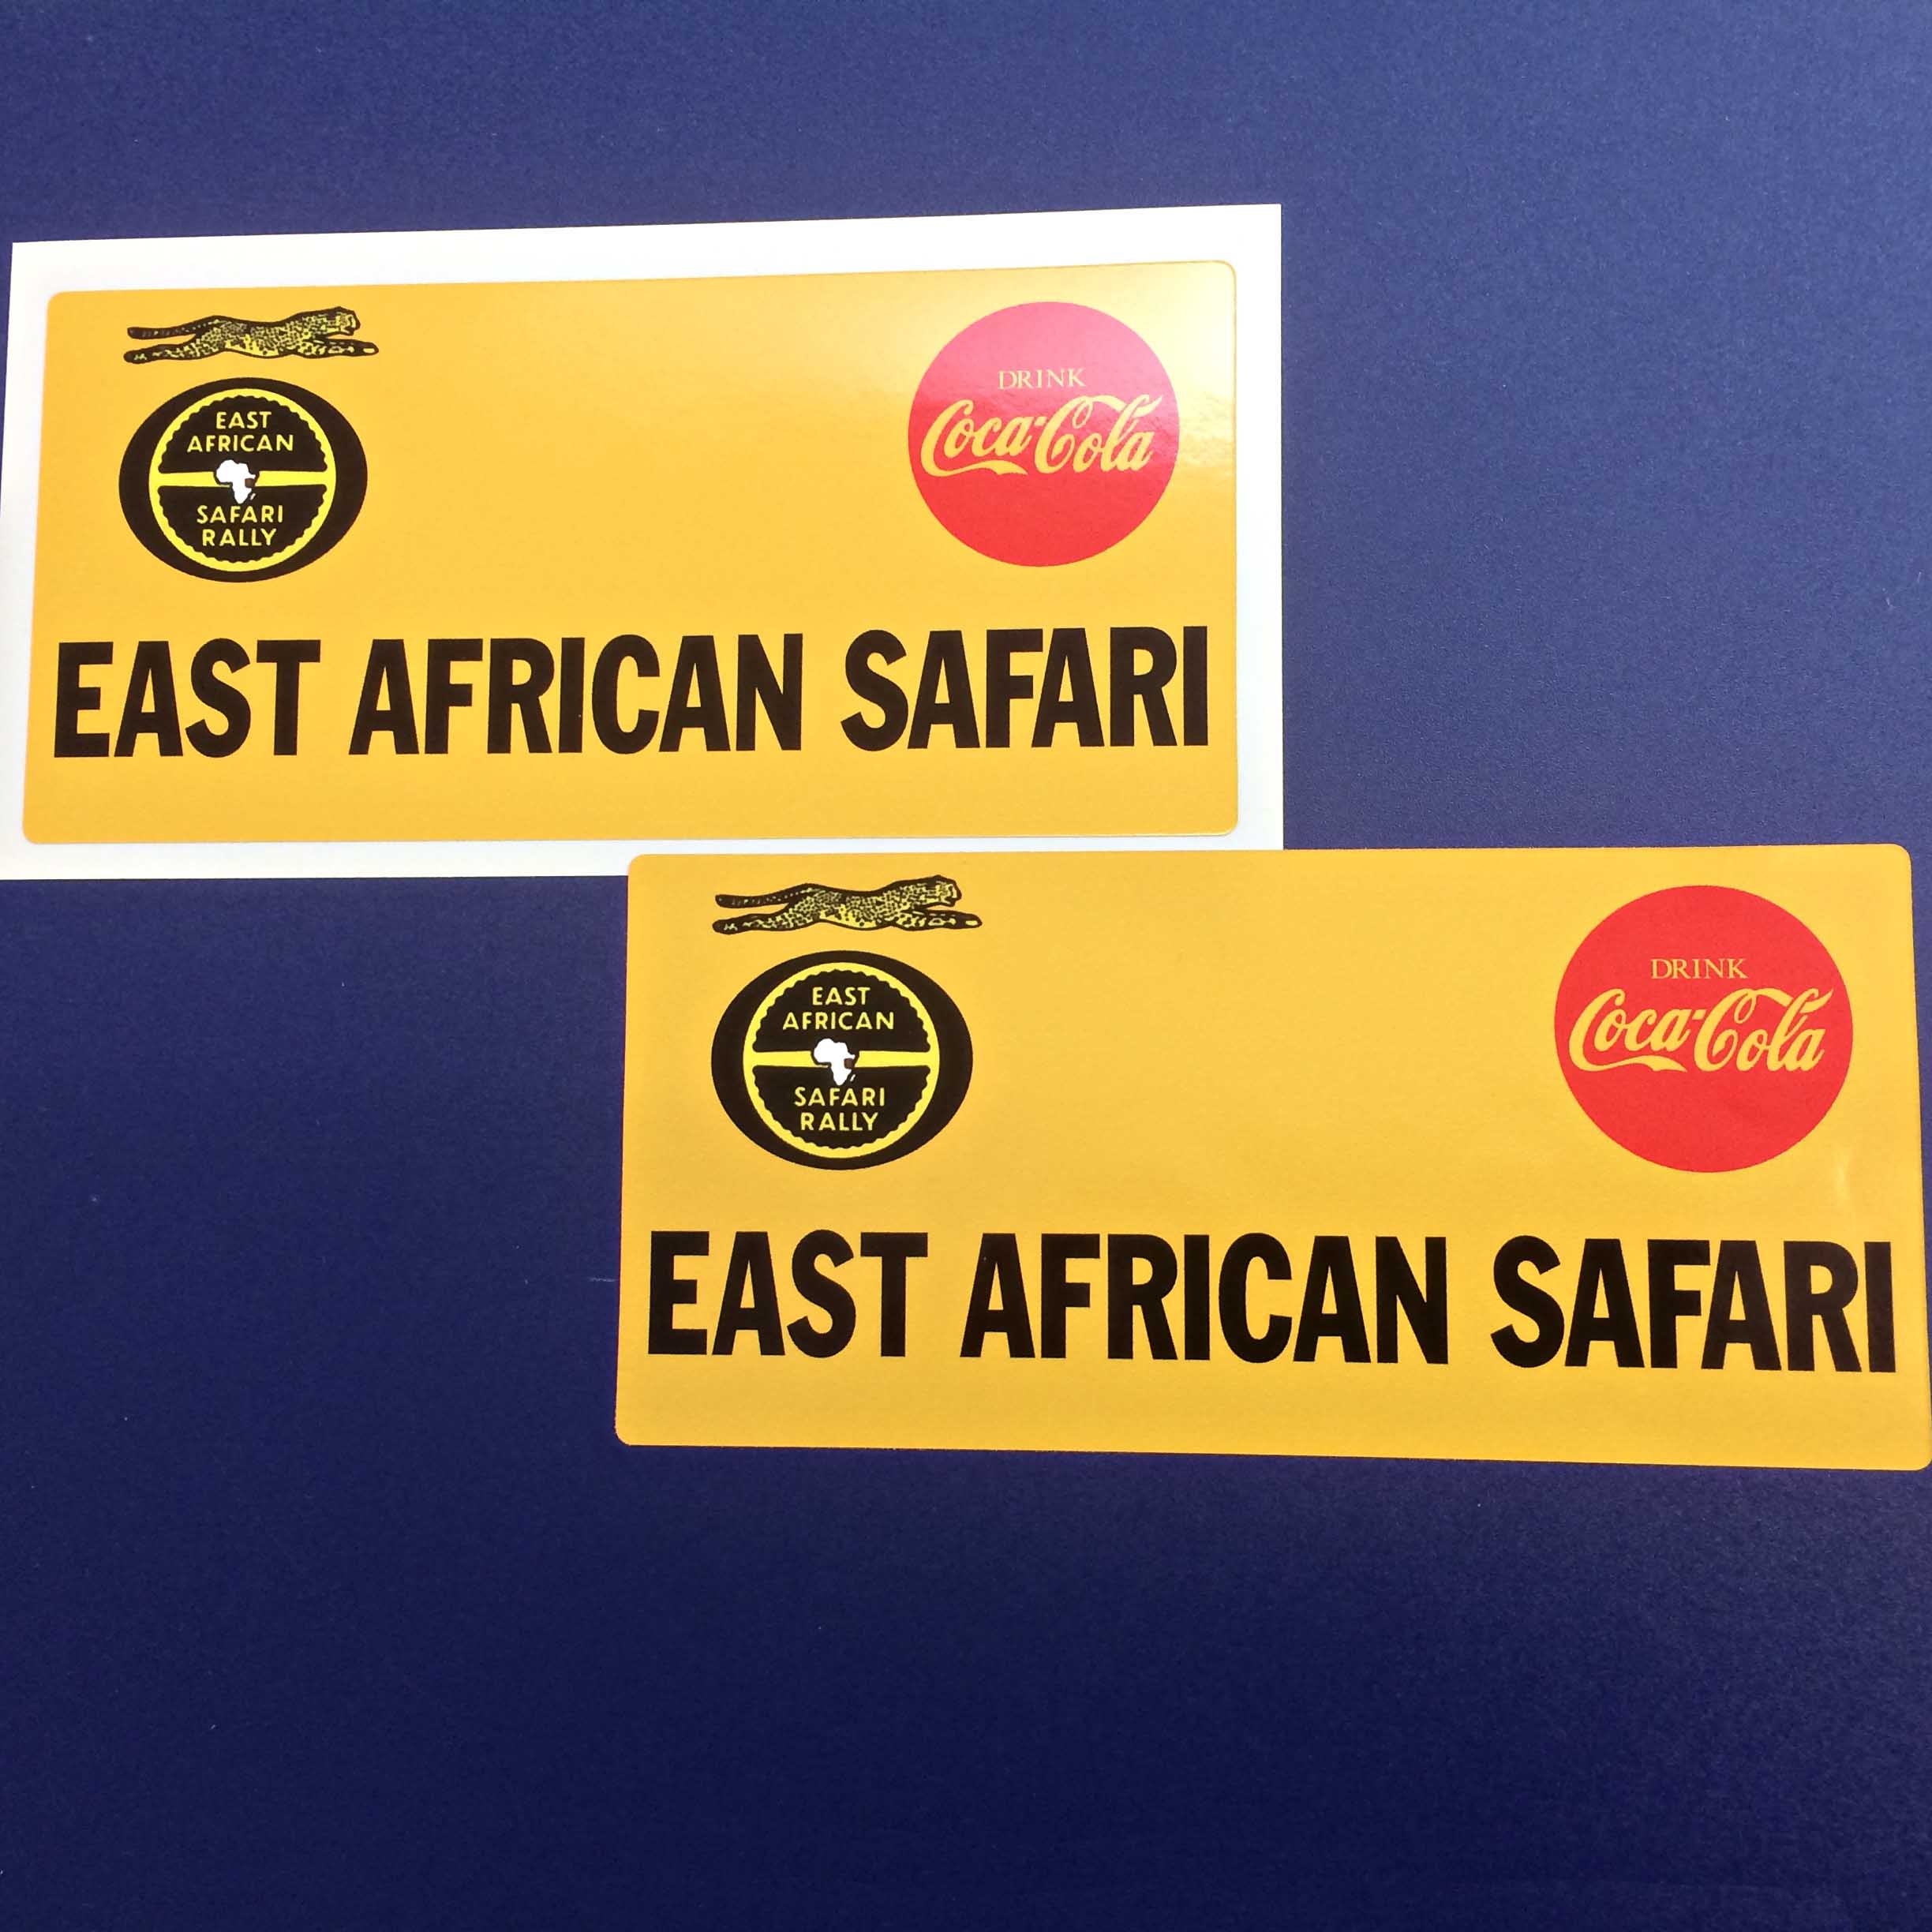 East African Safari in black lettering on a yellow sticker. Above are two logos. Drink Coca Cola in a red circle and East African Safari Rally, a leaping leopard and a yellow steering wheel with a map of Africa in the centre on a black oval.